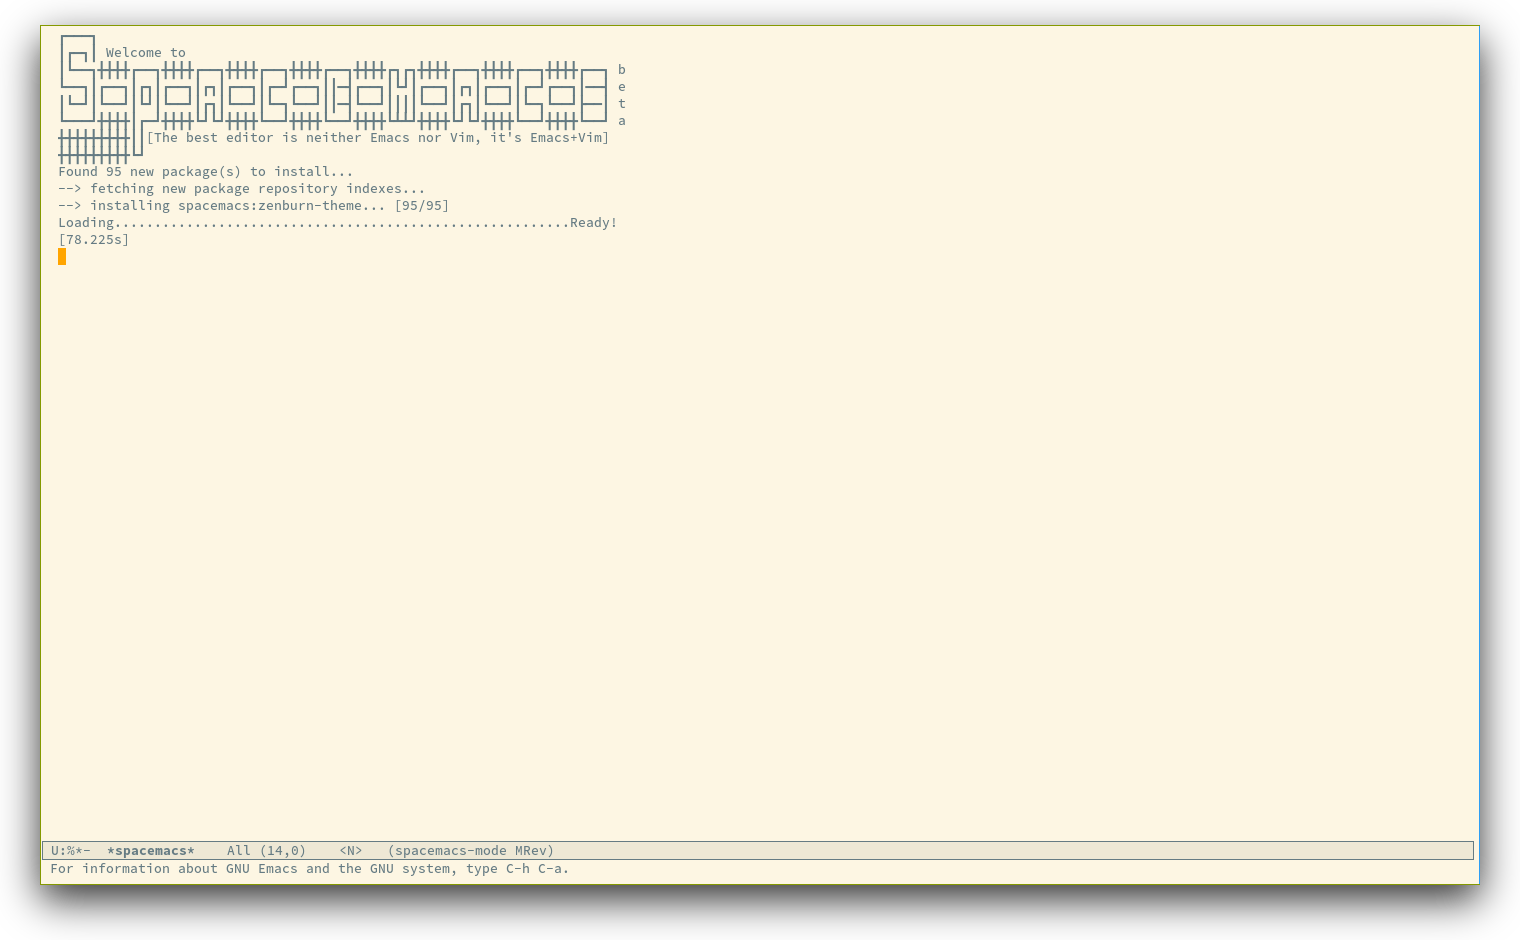 /TakeV/spacemacs/media/commit/7e8c275bc517d09d8d530f36a0b0c4752797211e/doc/img/spacemacs-startup.png